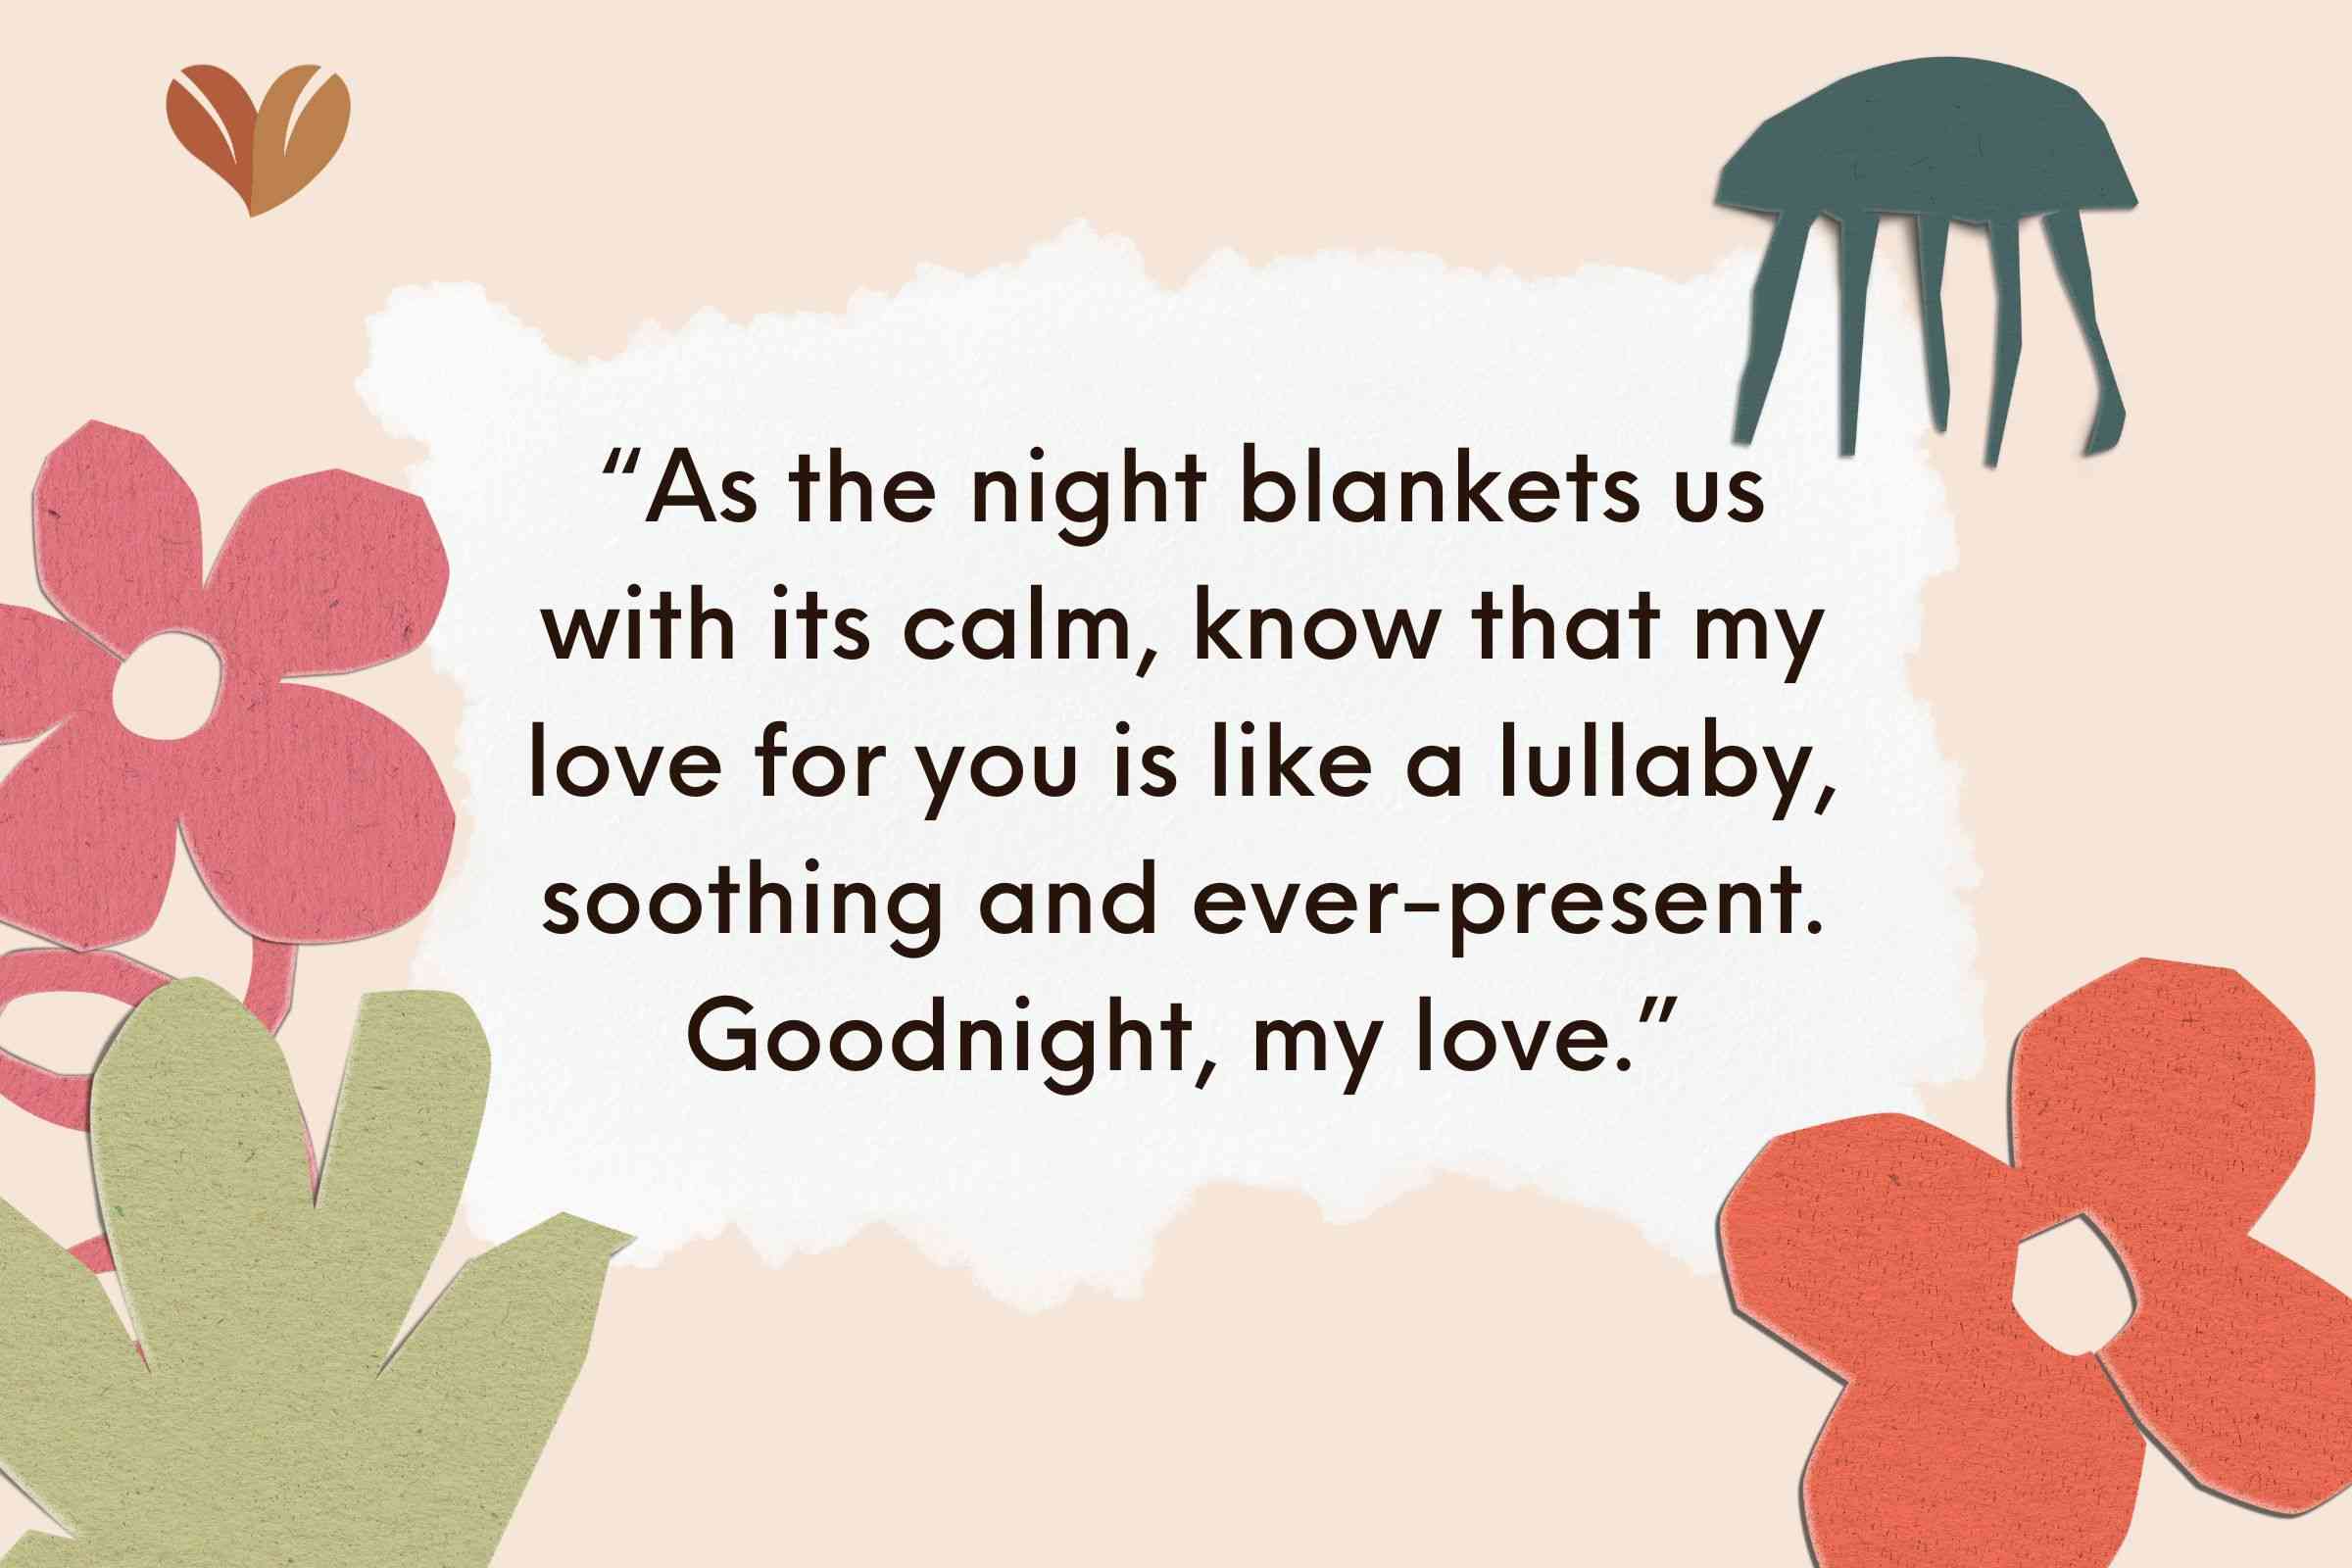 As the night blankets us with its calm, know that my love for you is like a lullaby, soothing and ever-present.